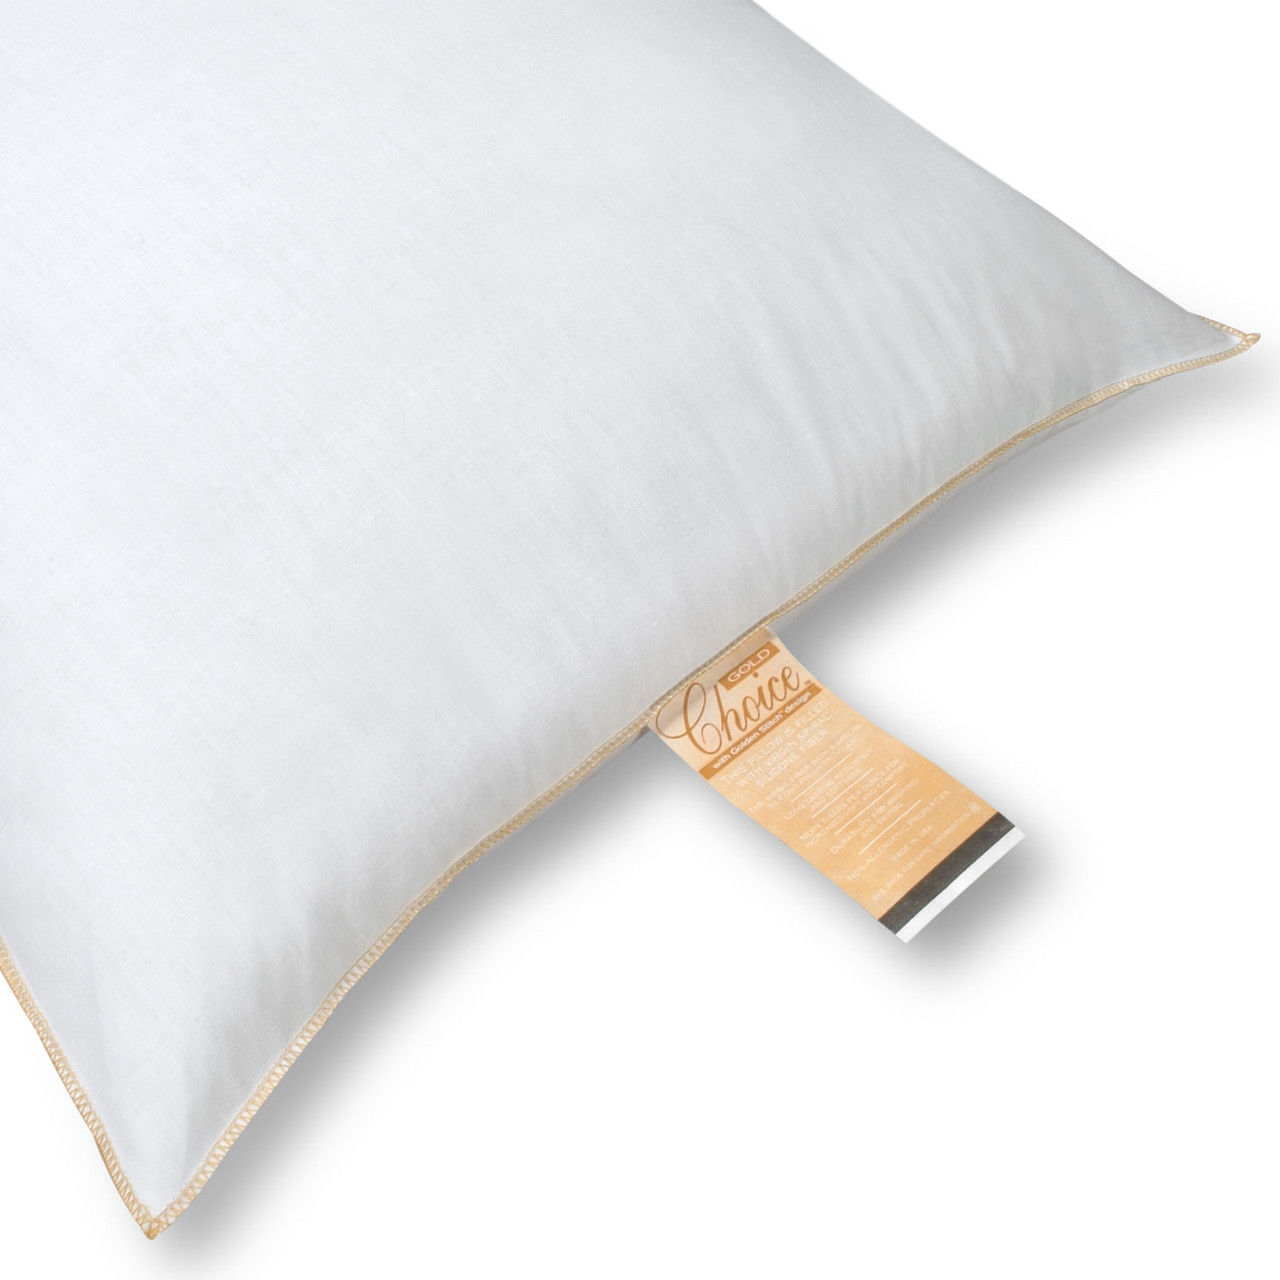 Can you specify the key feature that distinguishes gold choice pillows?